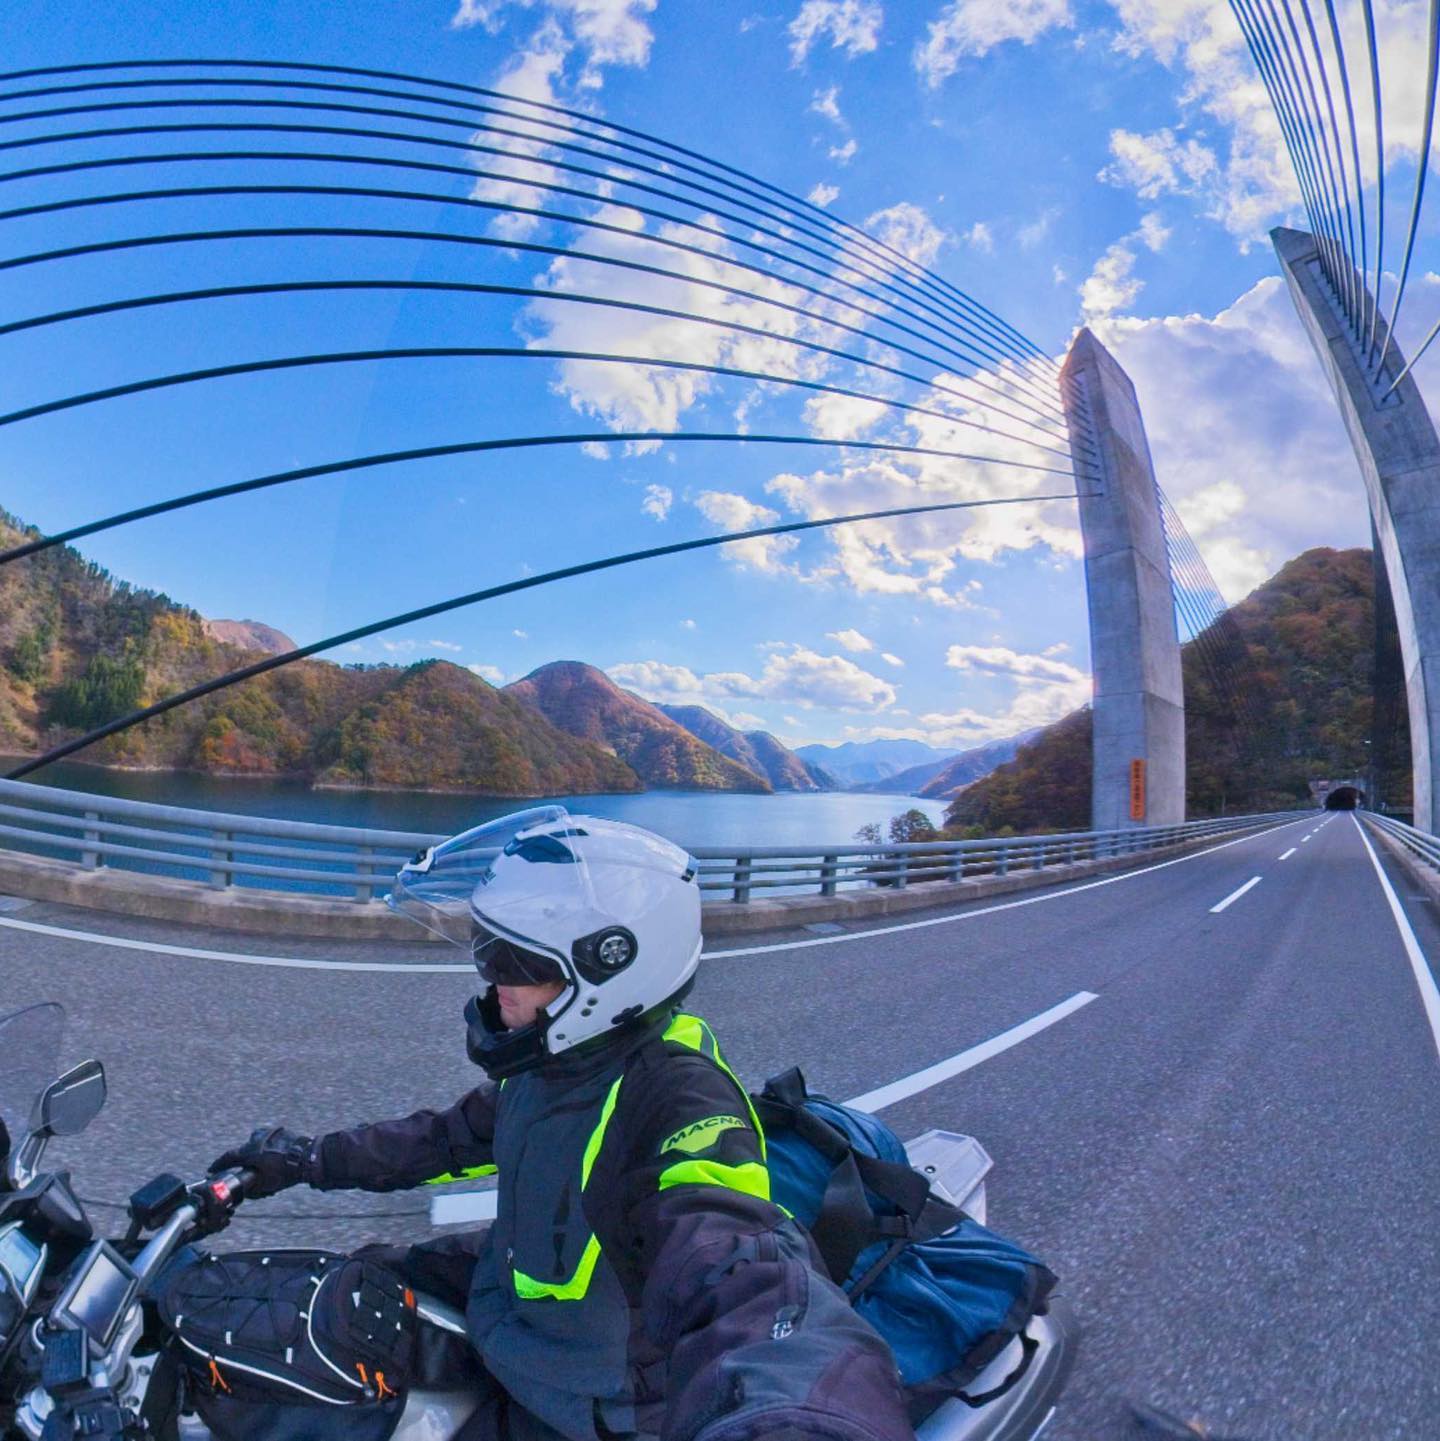 Just finishing the final part of my 21 day Japan autumn ride report on the blog. I did not see a lot of leaf colour but enjoyed some great scenery and terrific riding. #motorcyclephotography #motorcycletouring #motorcycletravel #motorcycleadventure #japantravel #japantrip #japanautumn #mototour #theta360 #fjr1300 #macna #theopenroad #freedommachine #gifu